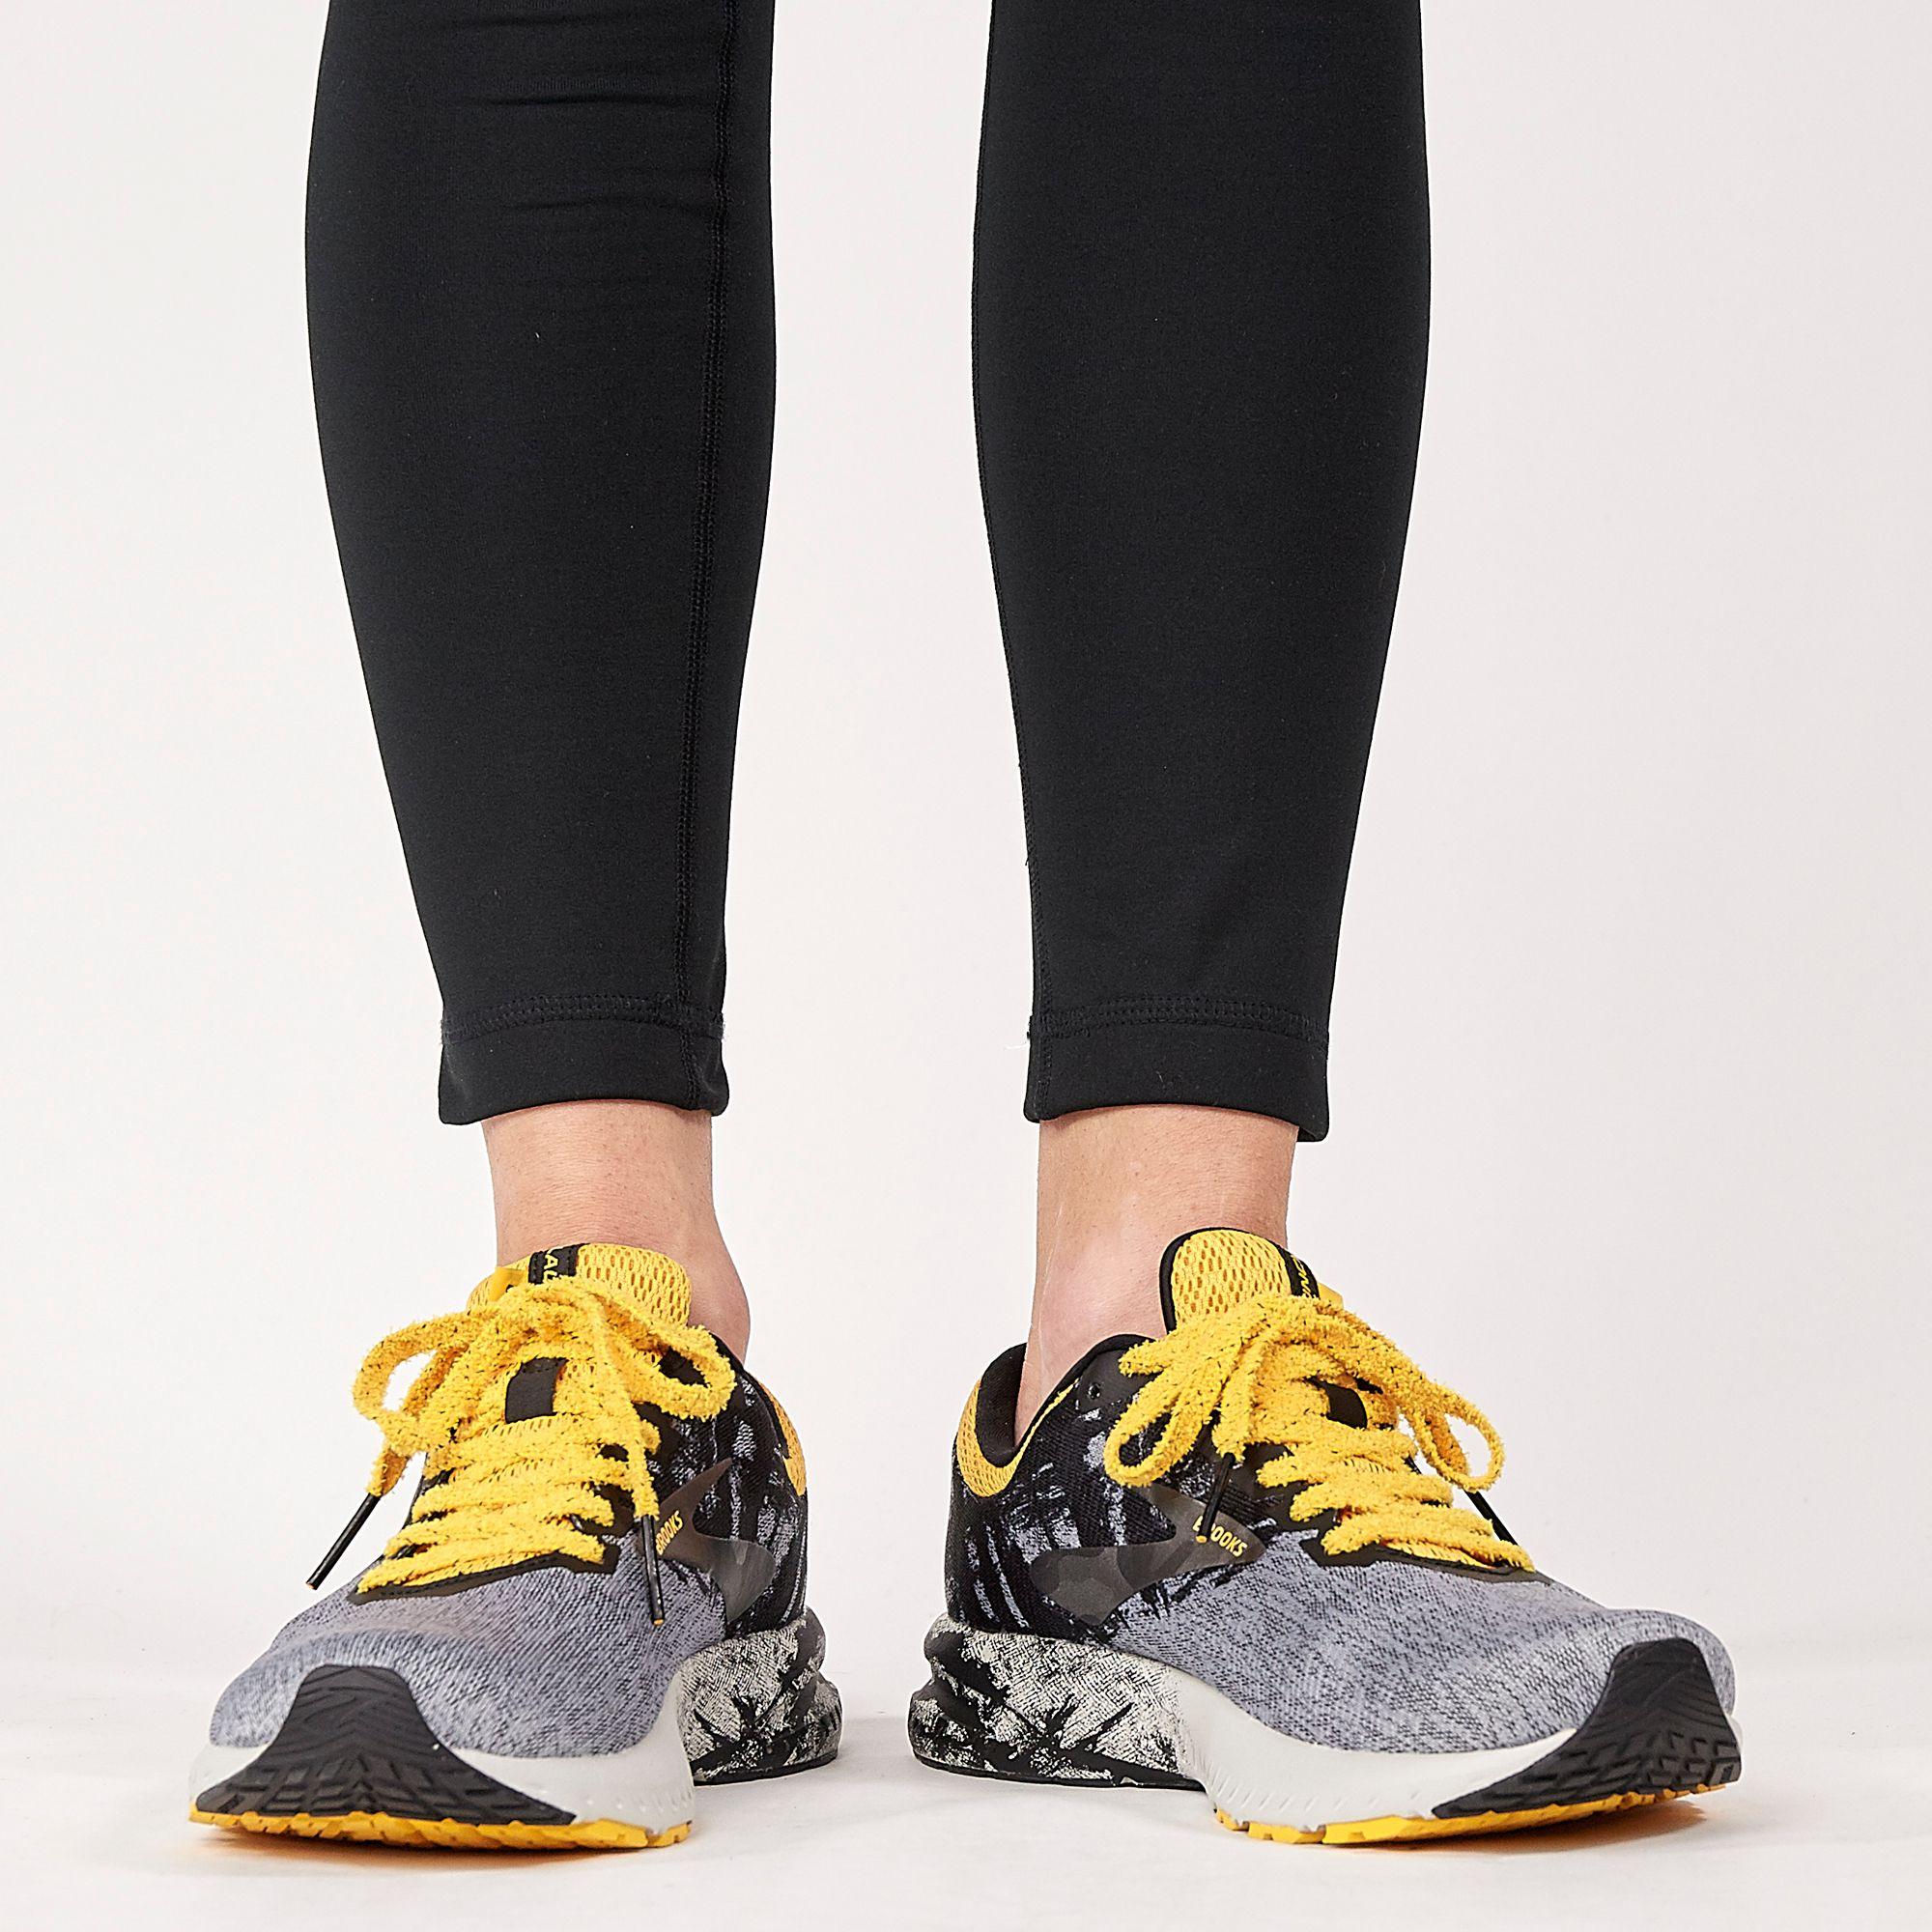 brooks launch 6 pittsburgh edition